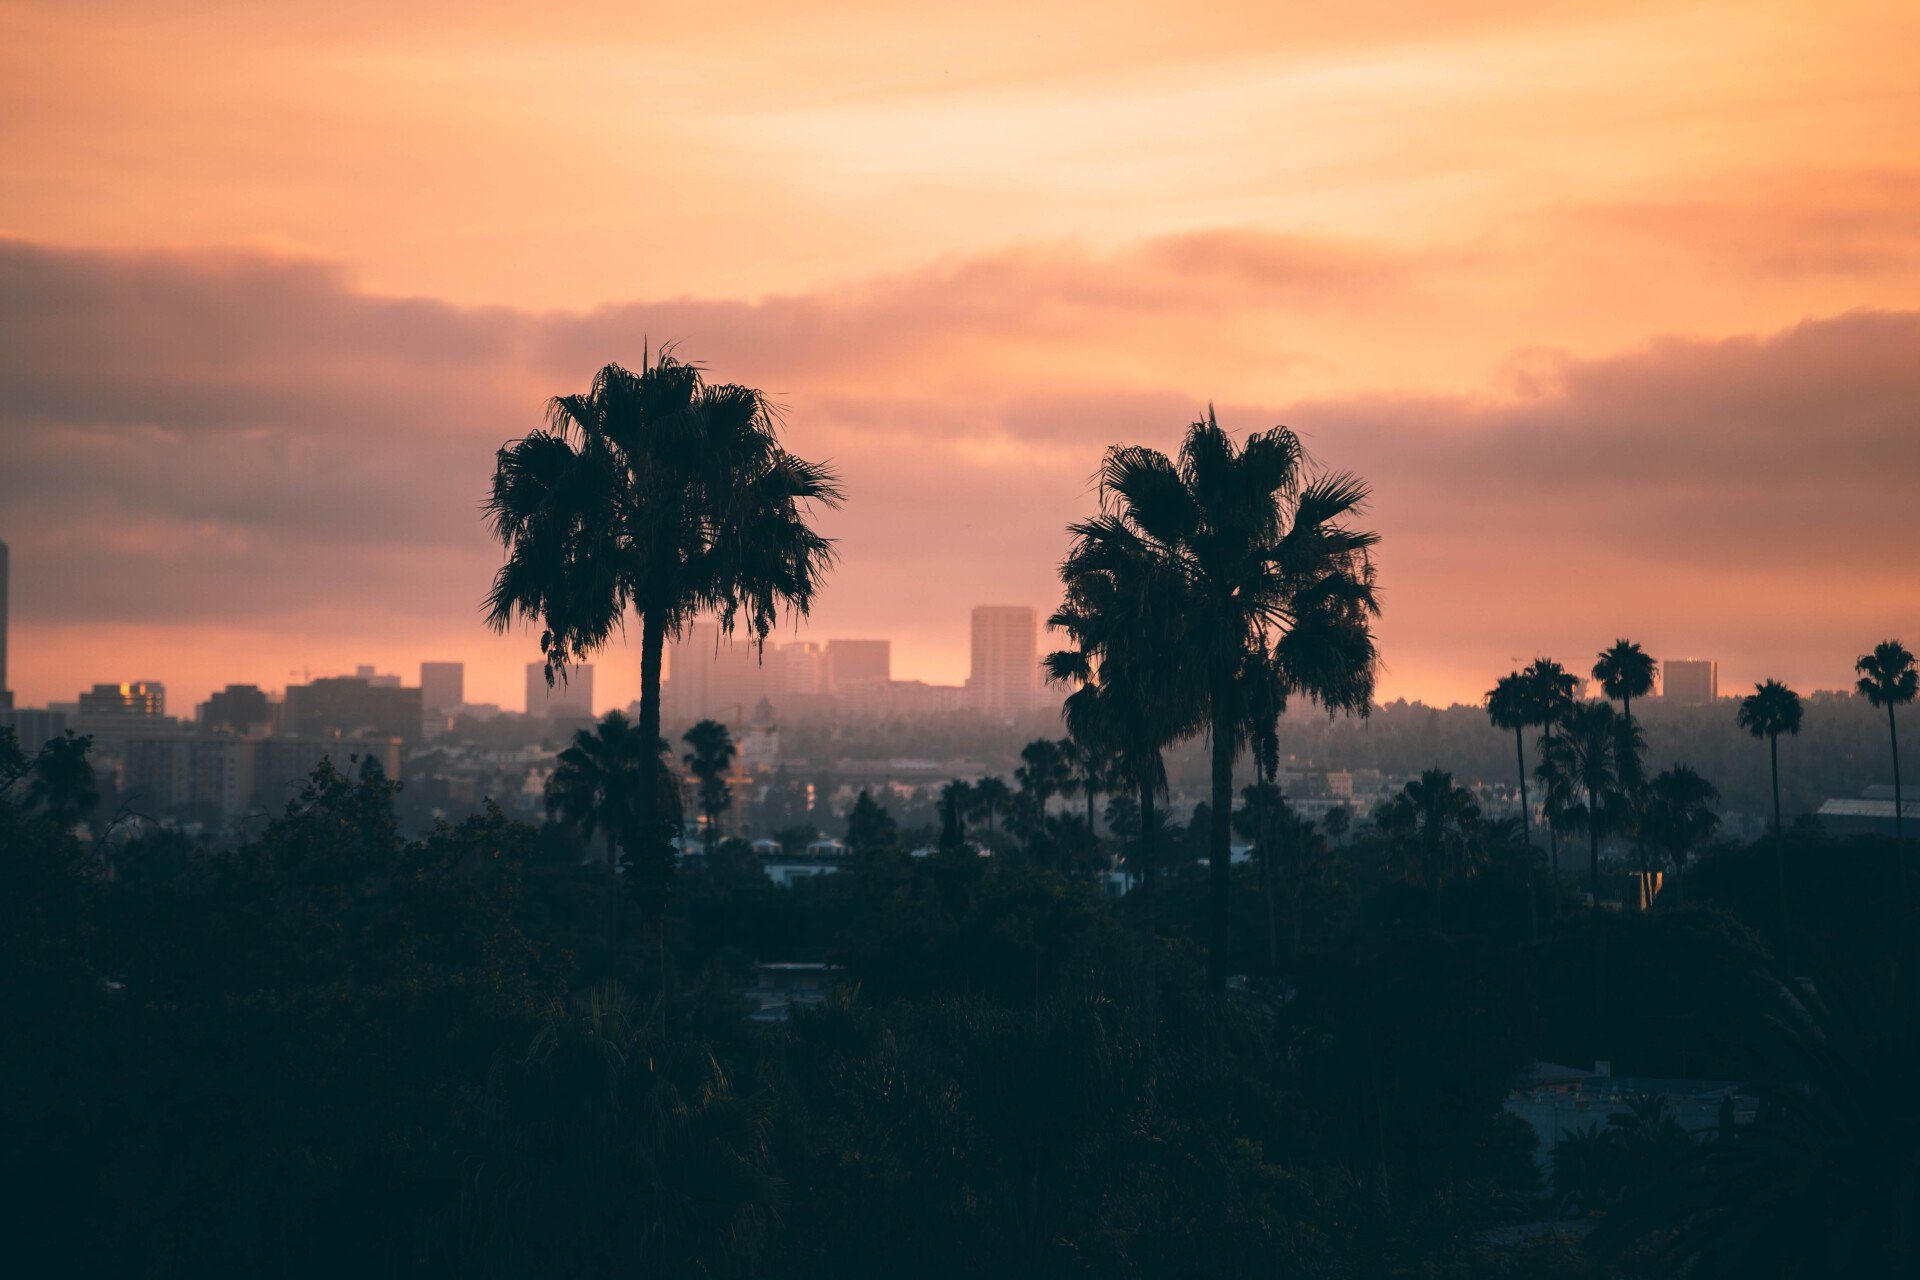 City Skyline with Palm Trees and Hazy Sunset